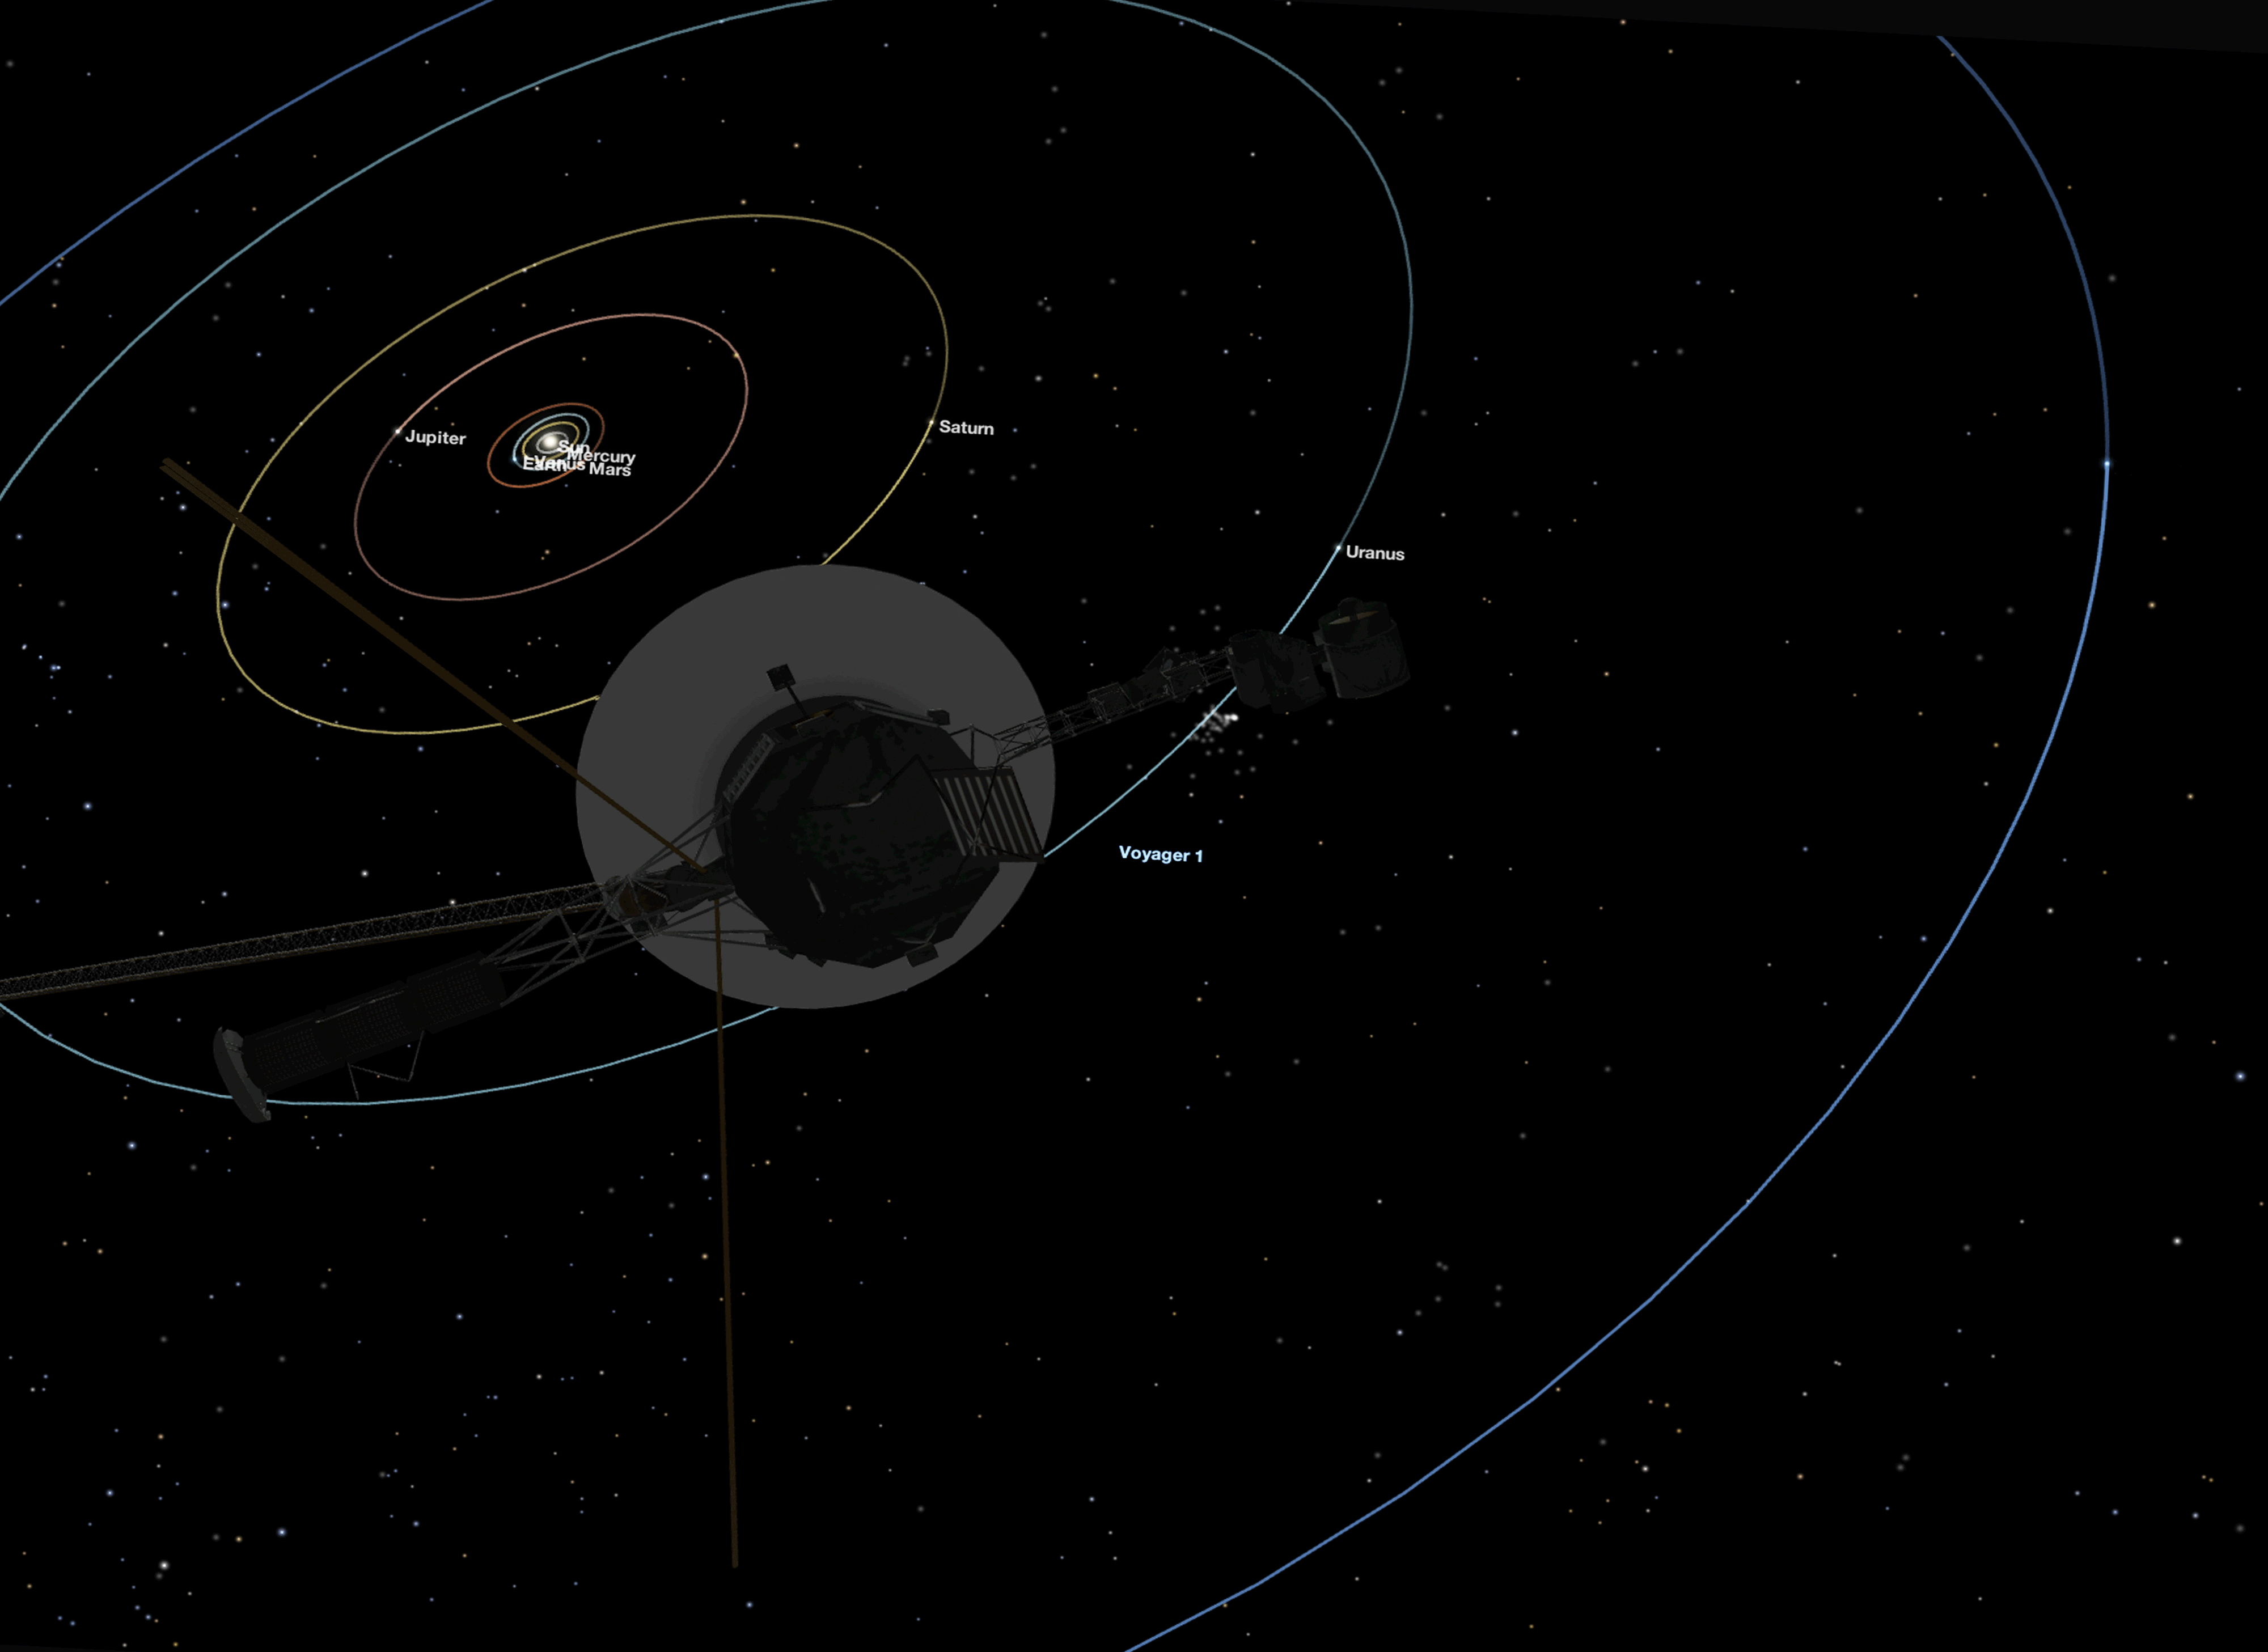 Animated GIF showing the family portrait image from the perspective of Voyager 1 in 1990.